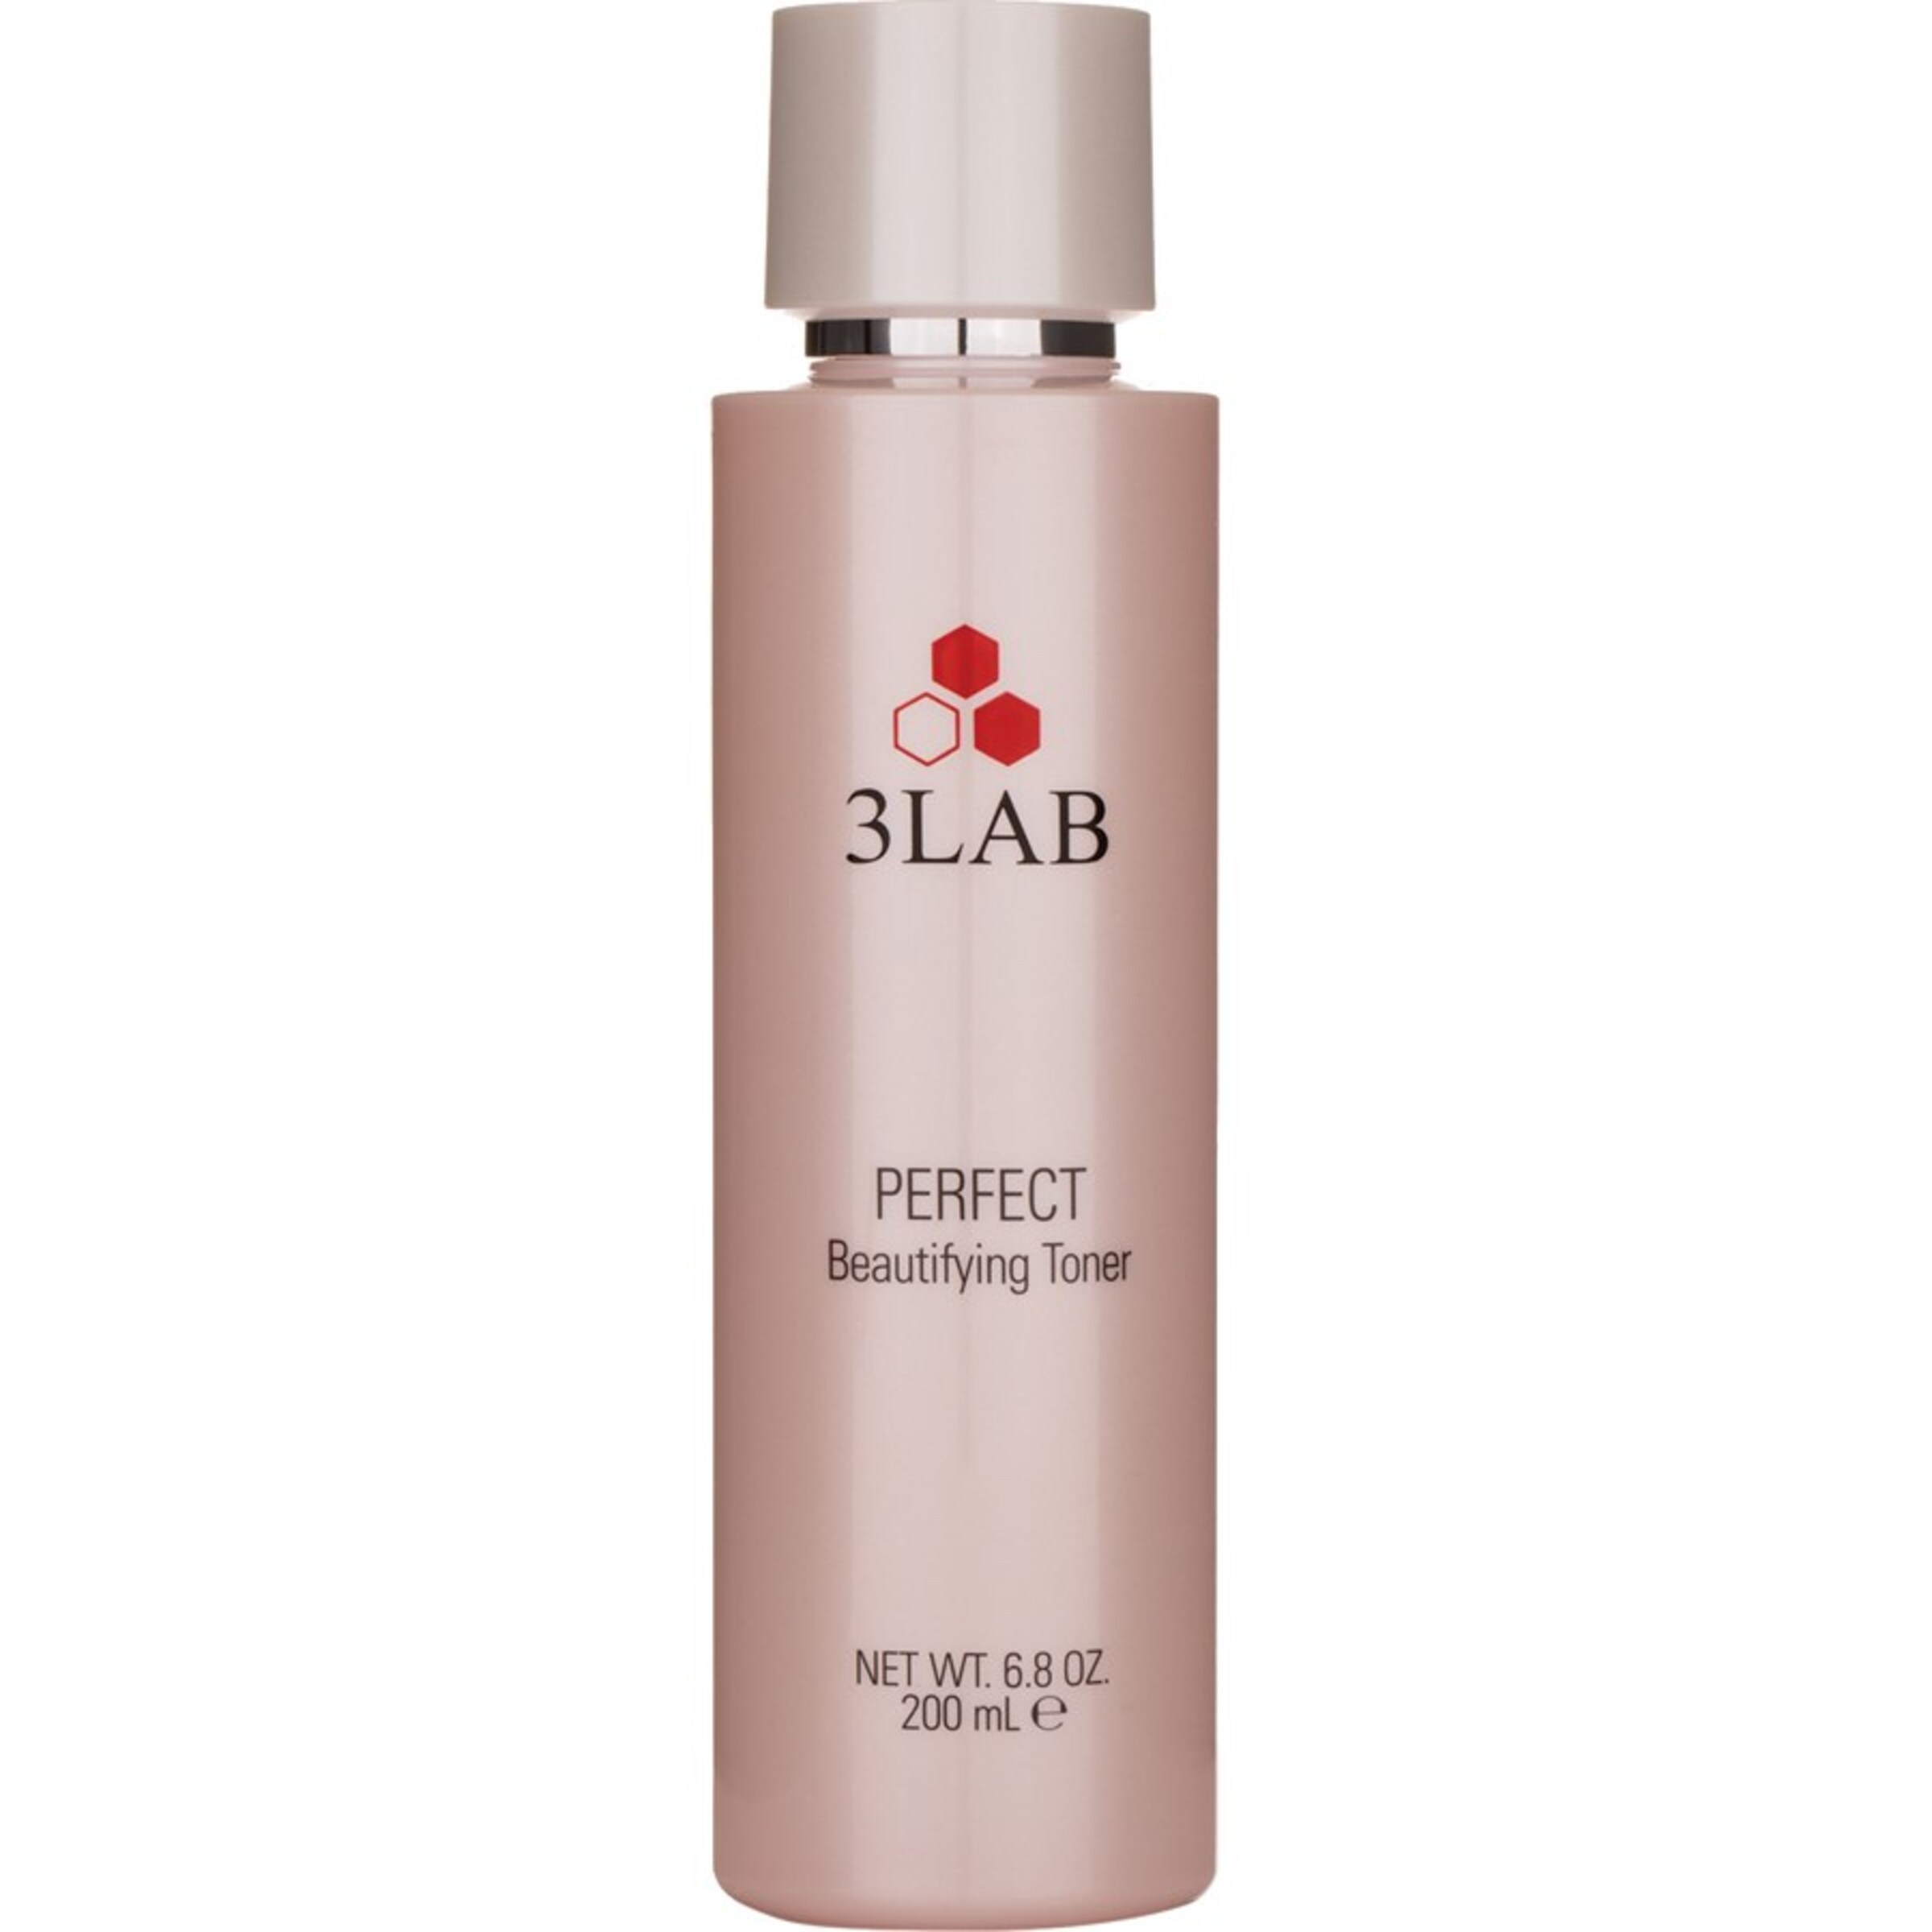 3LAB Toner Perfect Beautifying in 